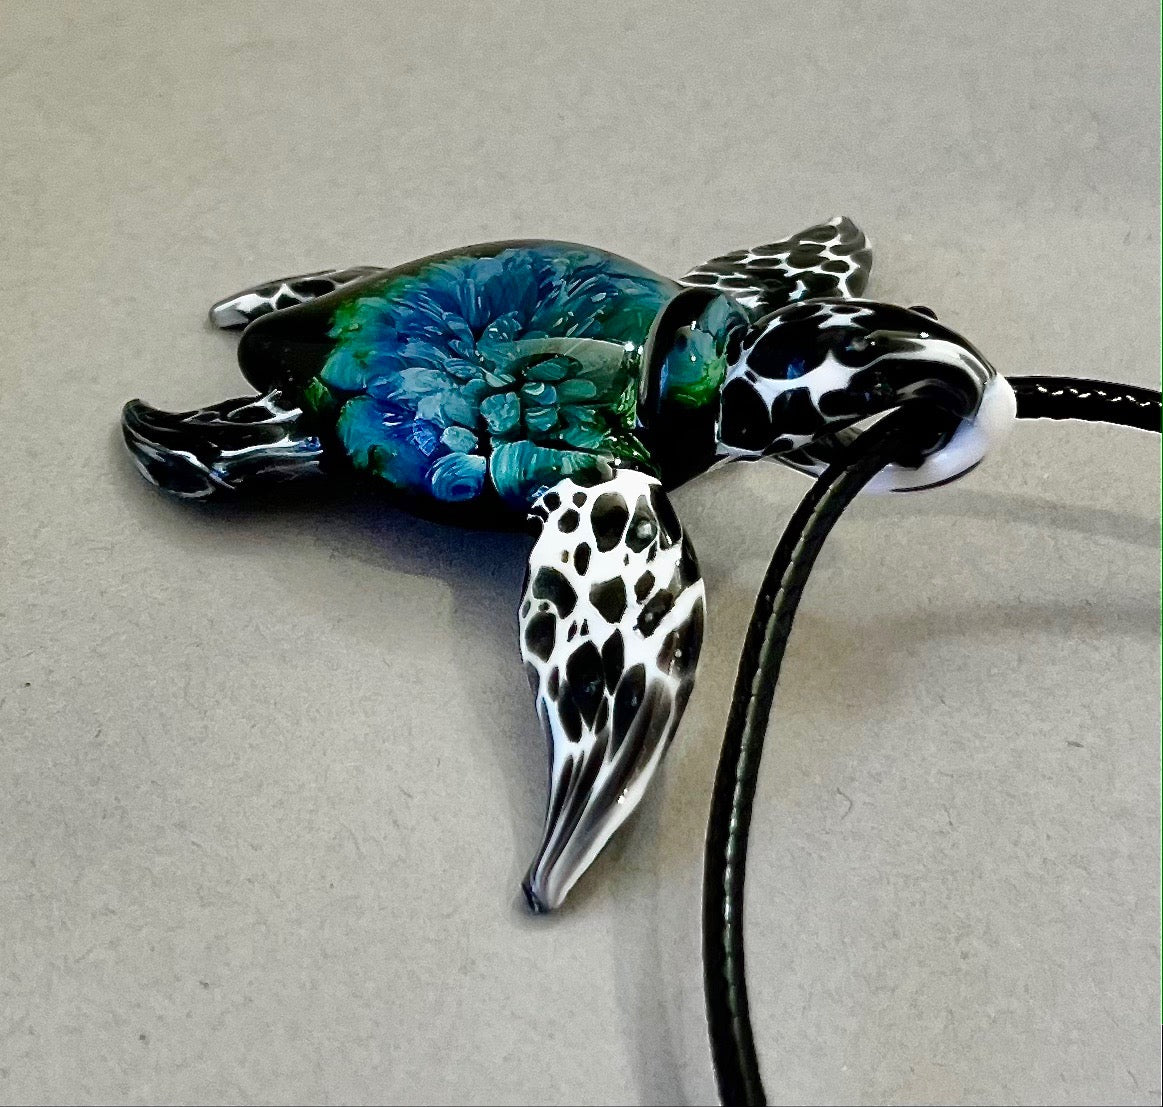 glass black and white spotted sea turtle pendant with iceberg style explosion in the shell at a 360 degree angle.